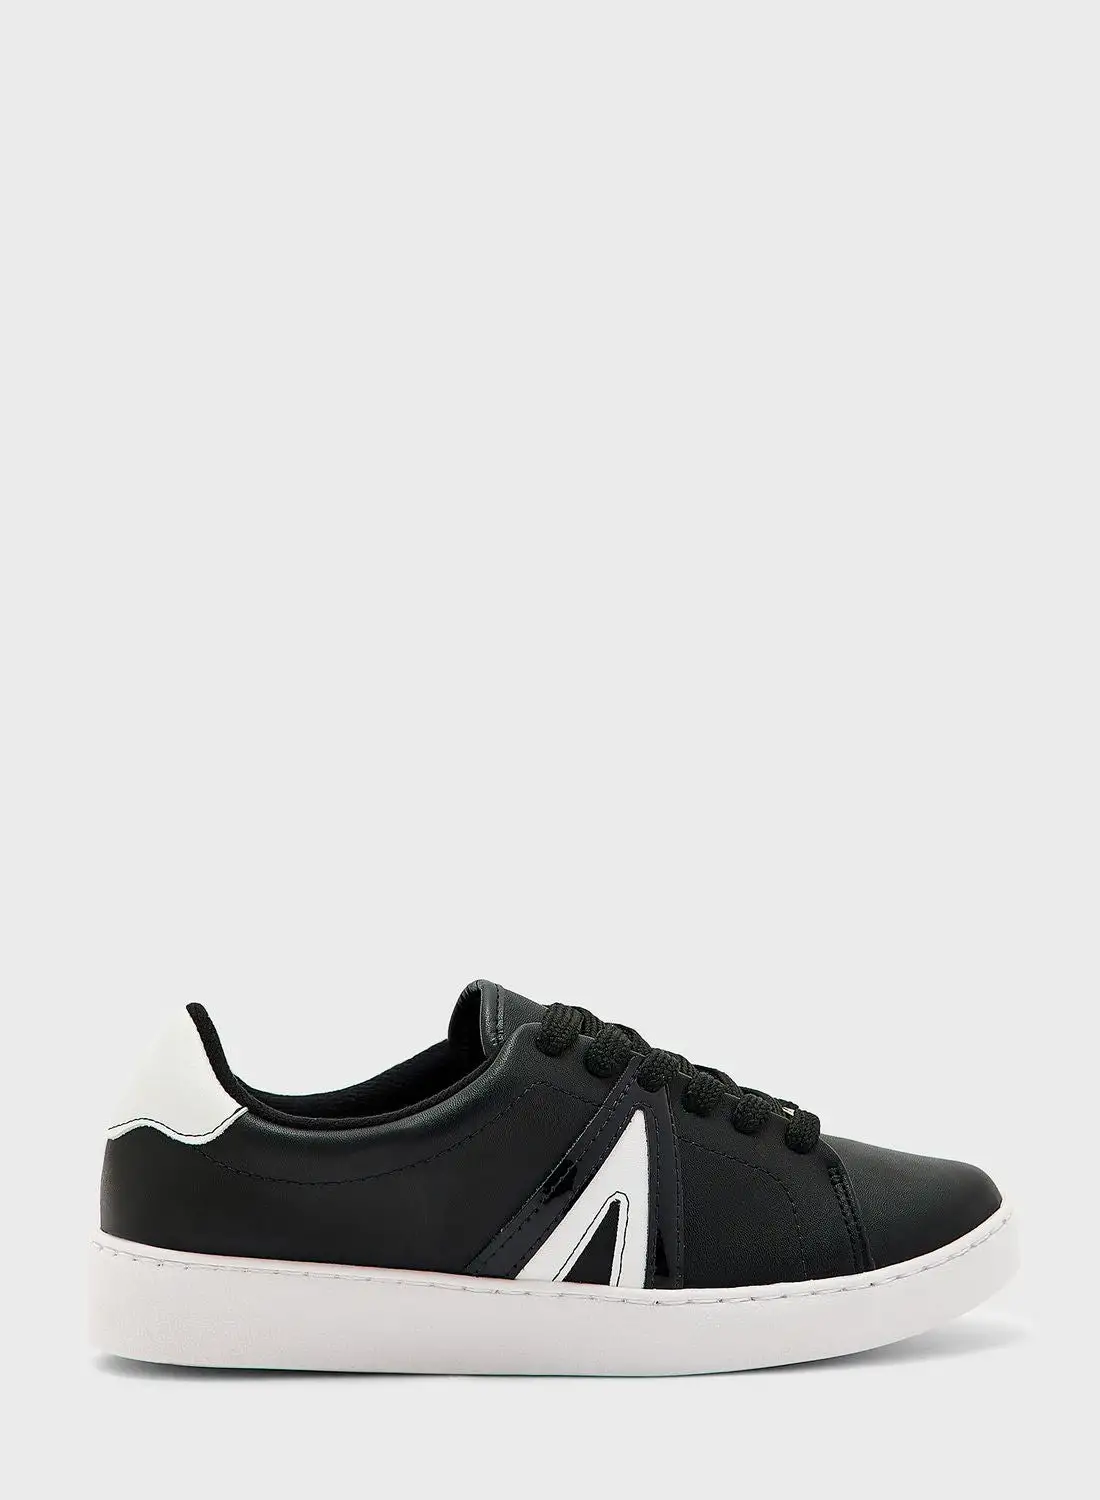 VIZZANO Lace Up Low Top Sneakers